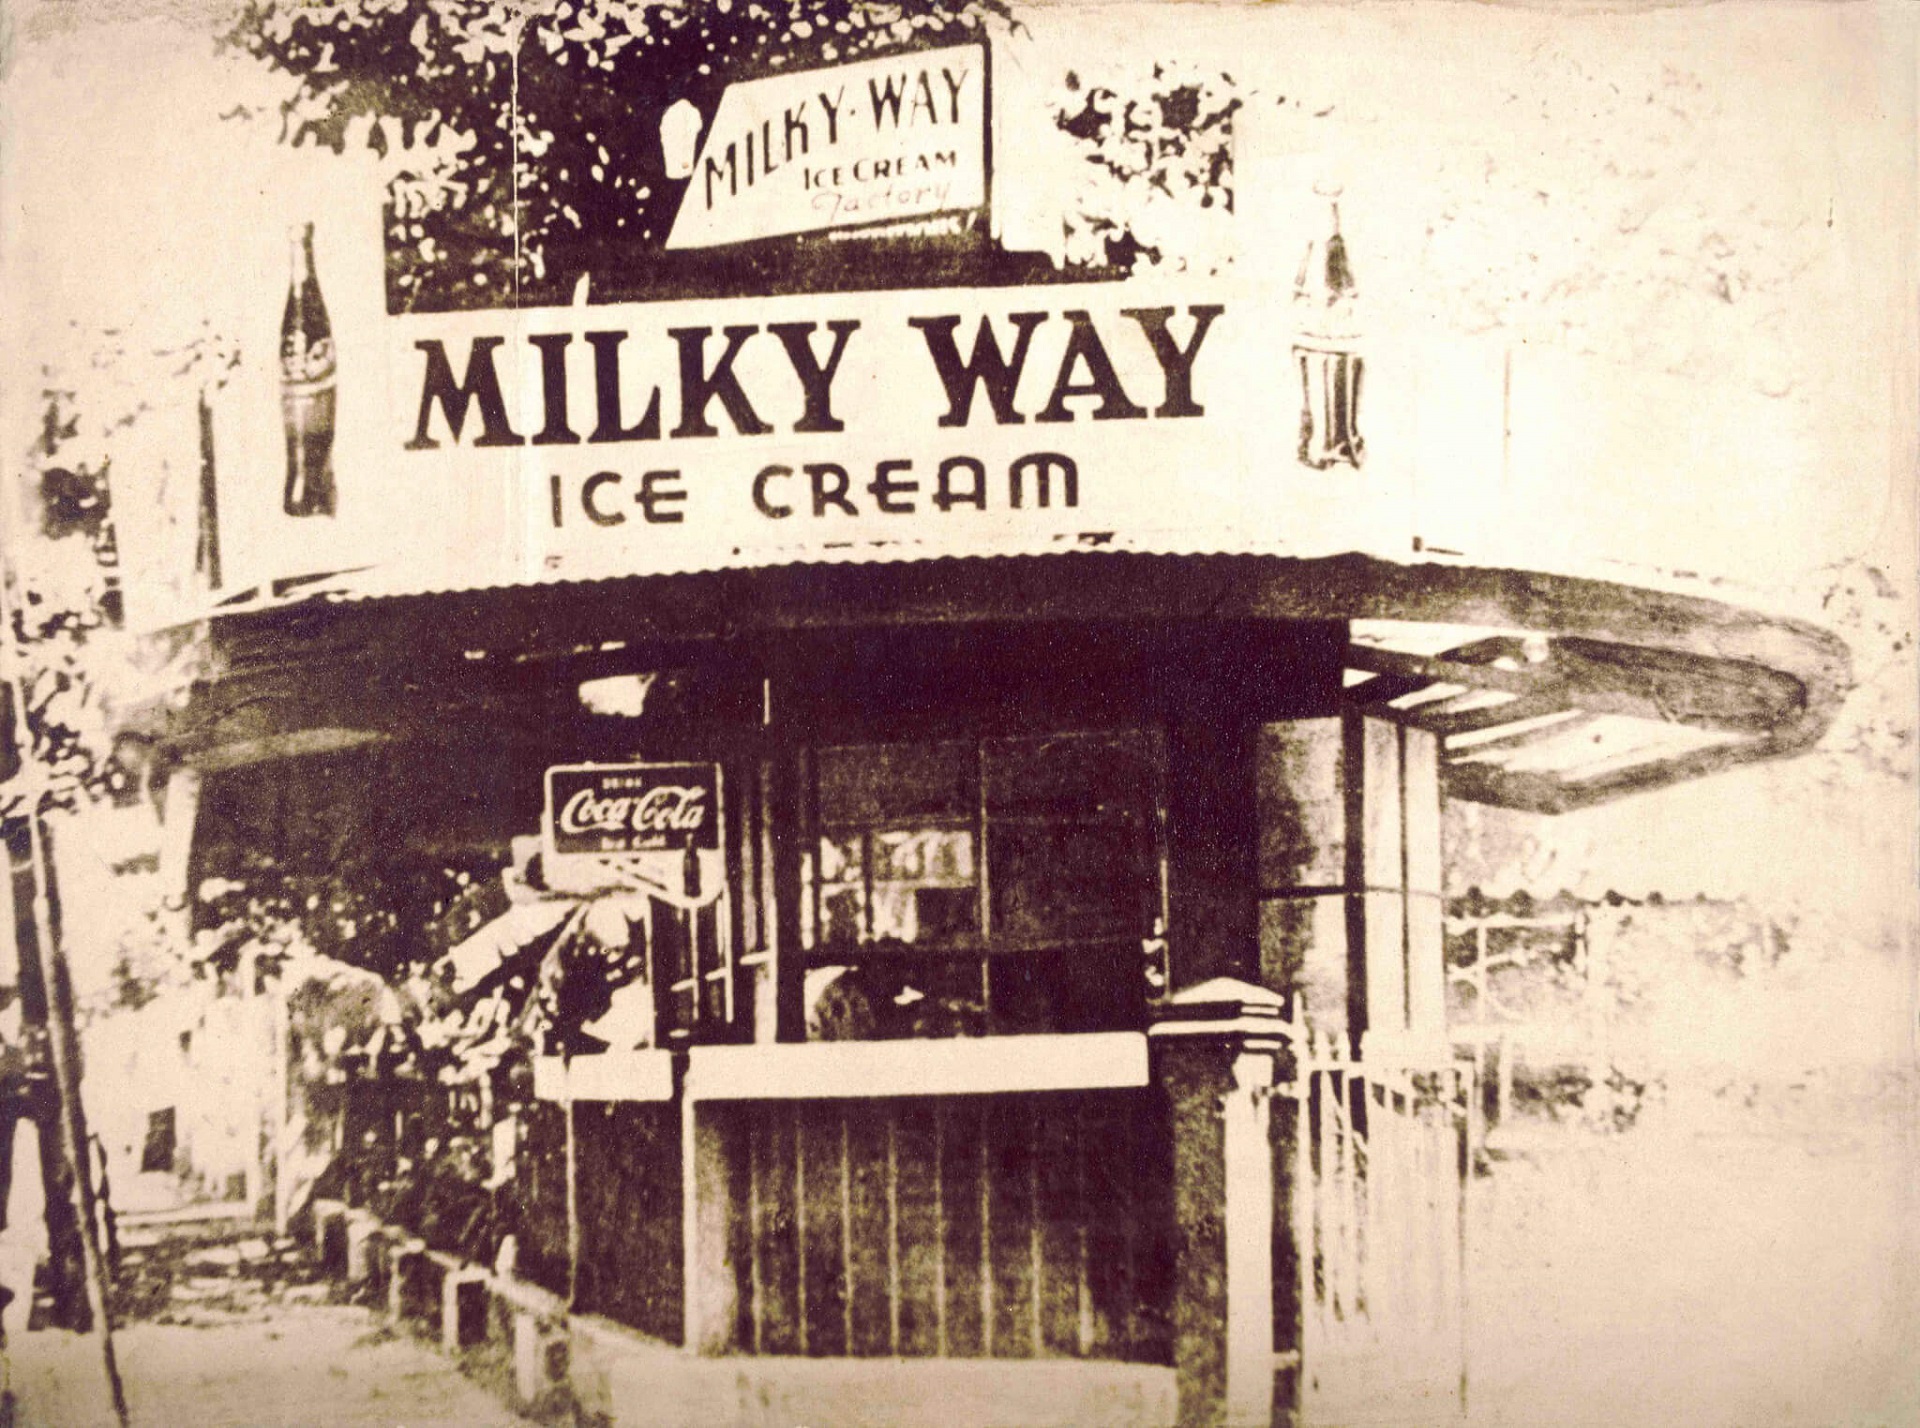 The first restaurant of J. Gamboa's mother: the Milky Way